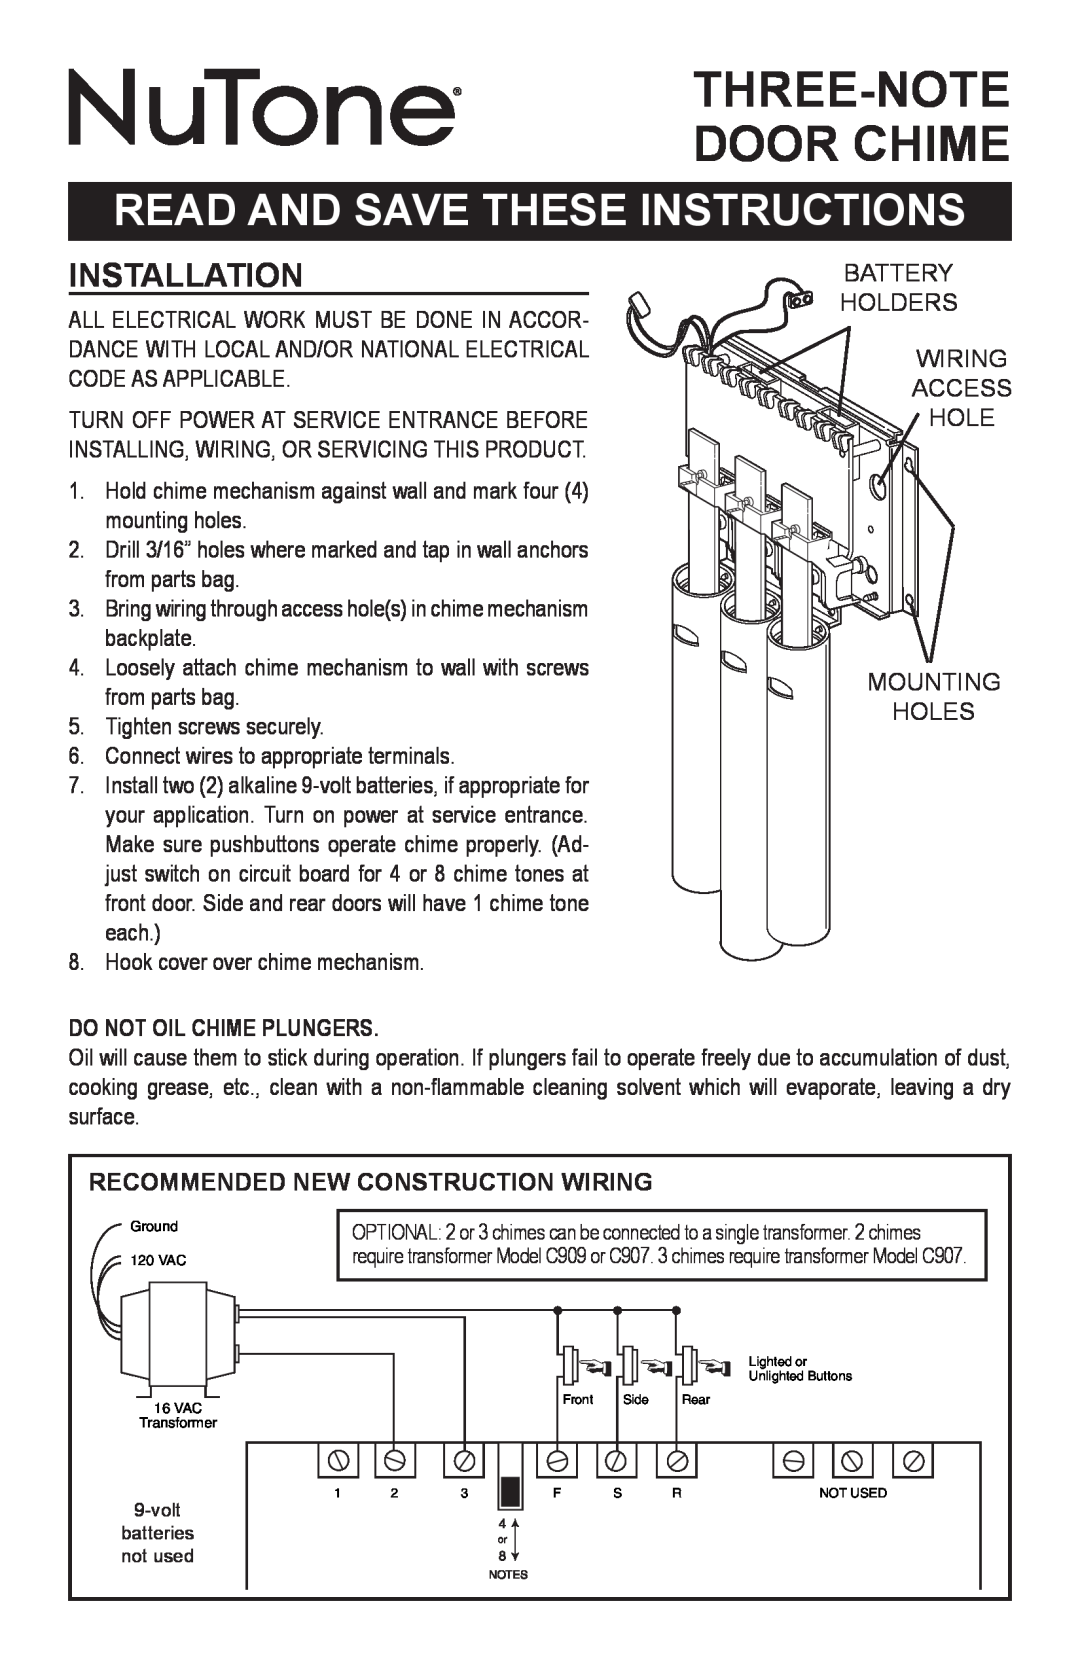 NuTone LA310CY manual Read And Save These Instructions, Installation, Do Not Oil Chime Plungers, Three-Note Door Chime 